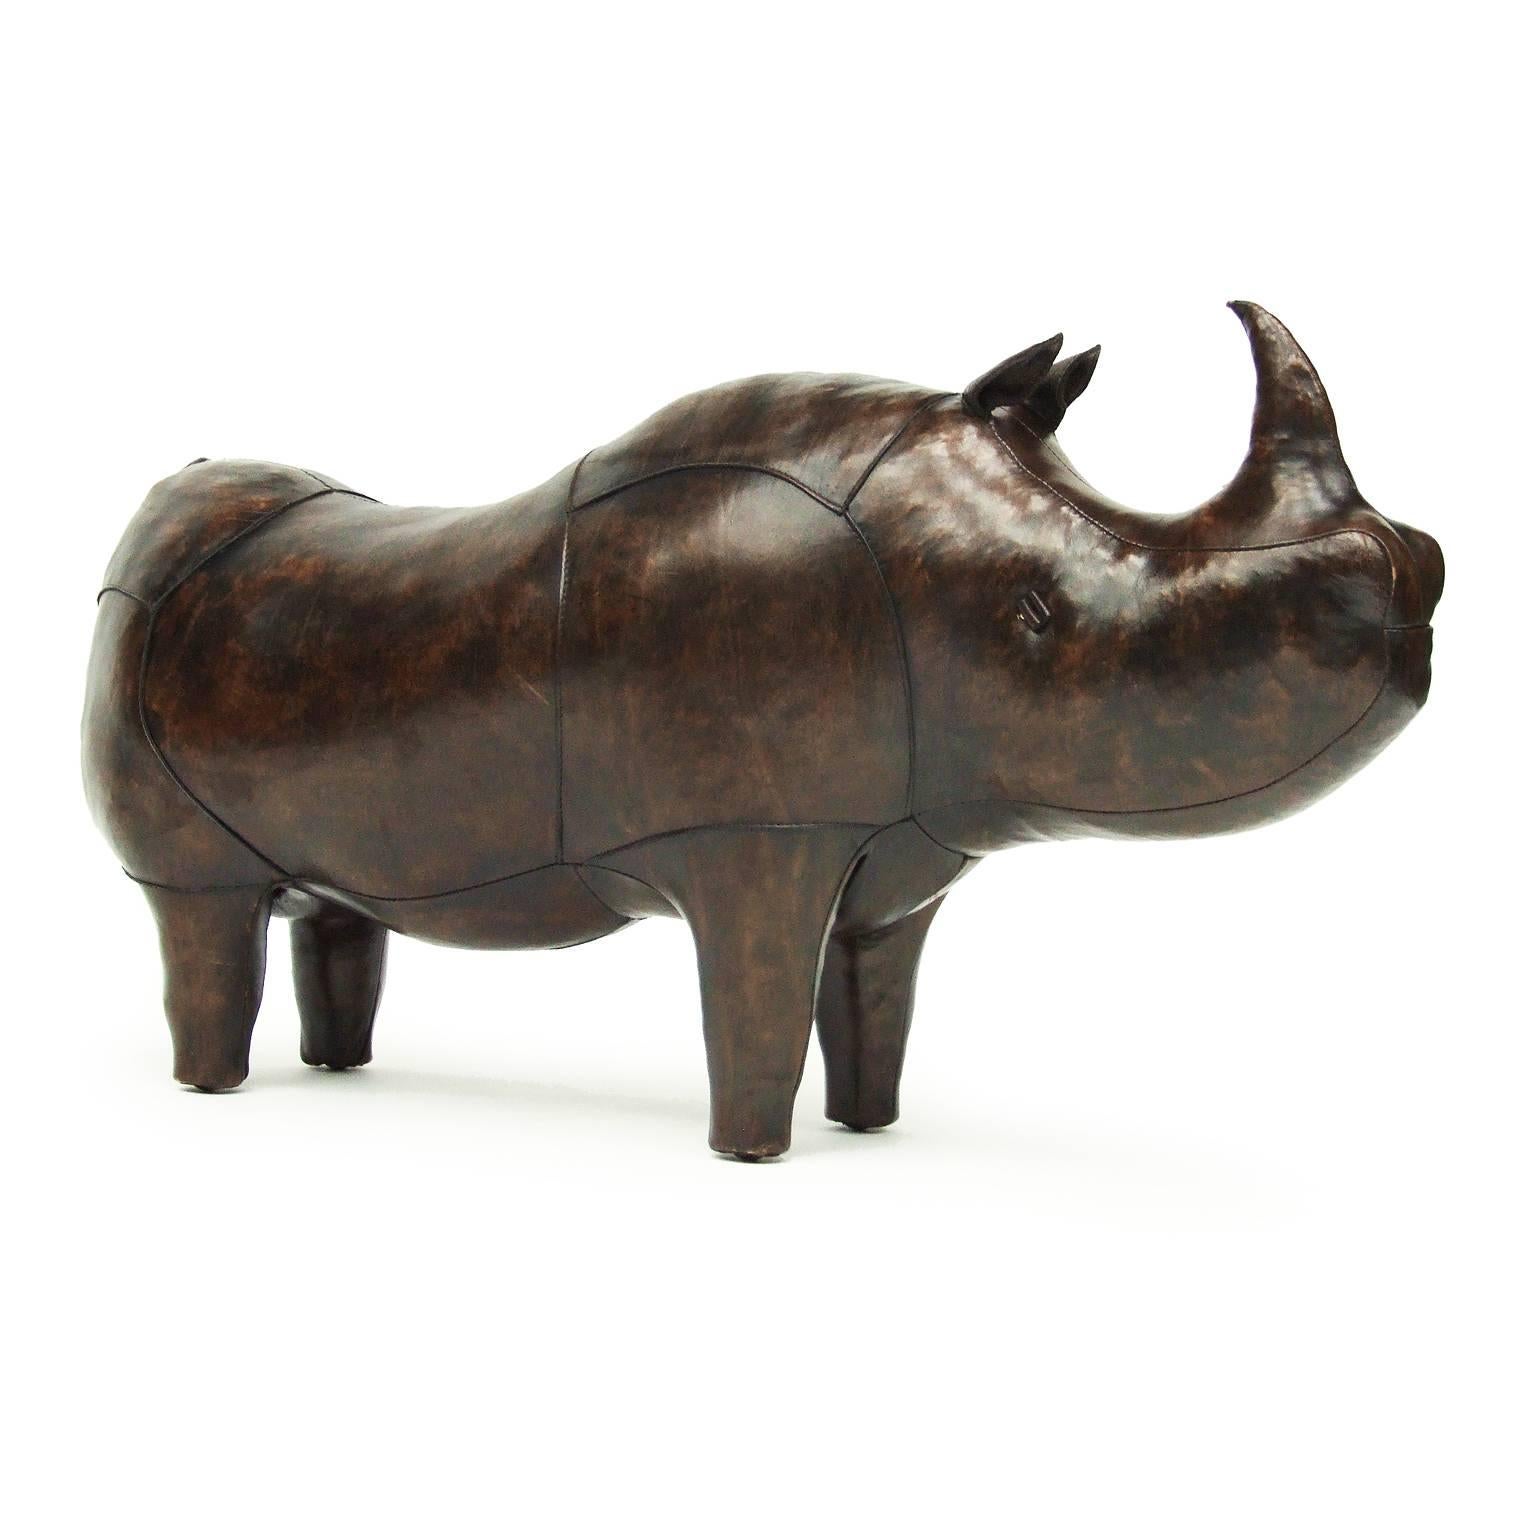 Large rhinoceros footstool designed by Dimitri Omersa for Omersa, UK.

Upholstered brown leather rhino design. Four metal studs.

Measures: H 60 cm x L 105 cm x W 35 cm.